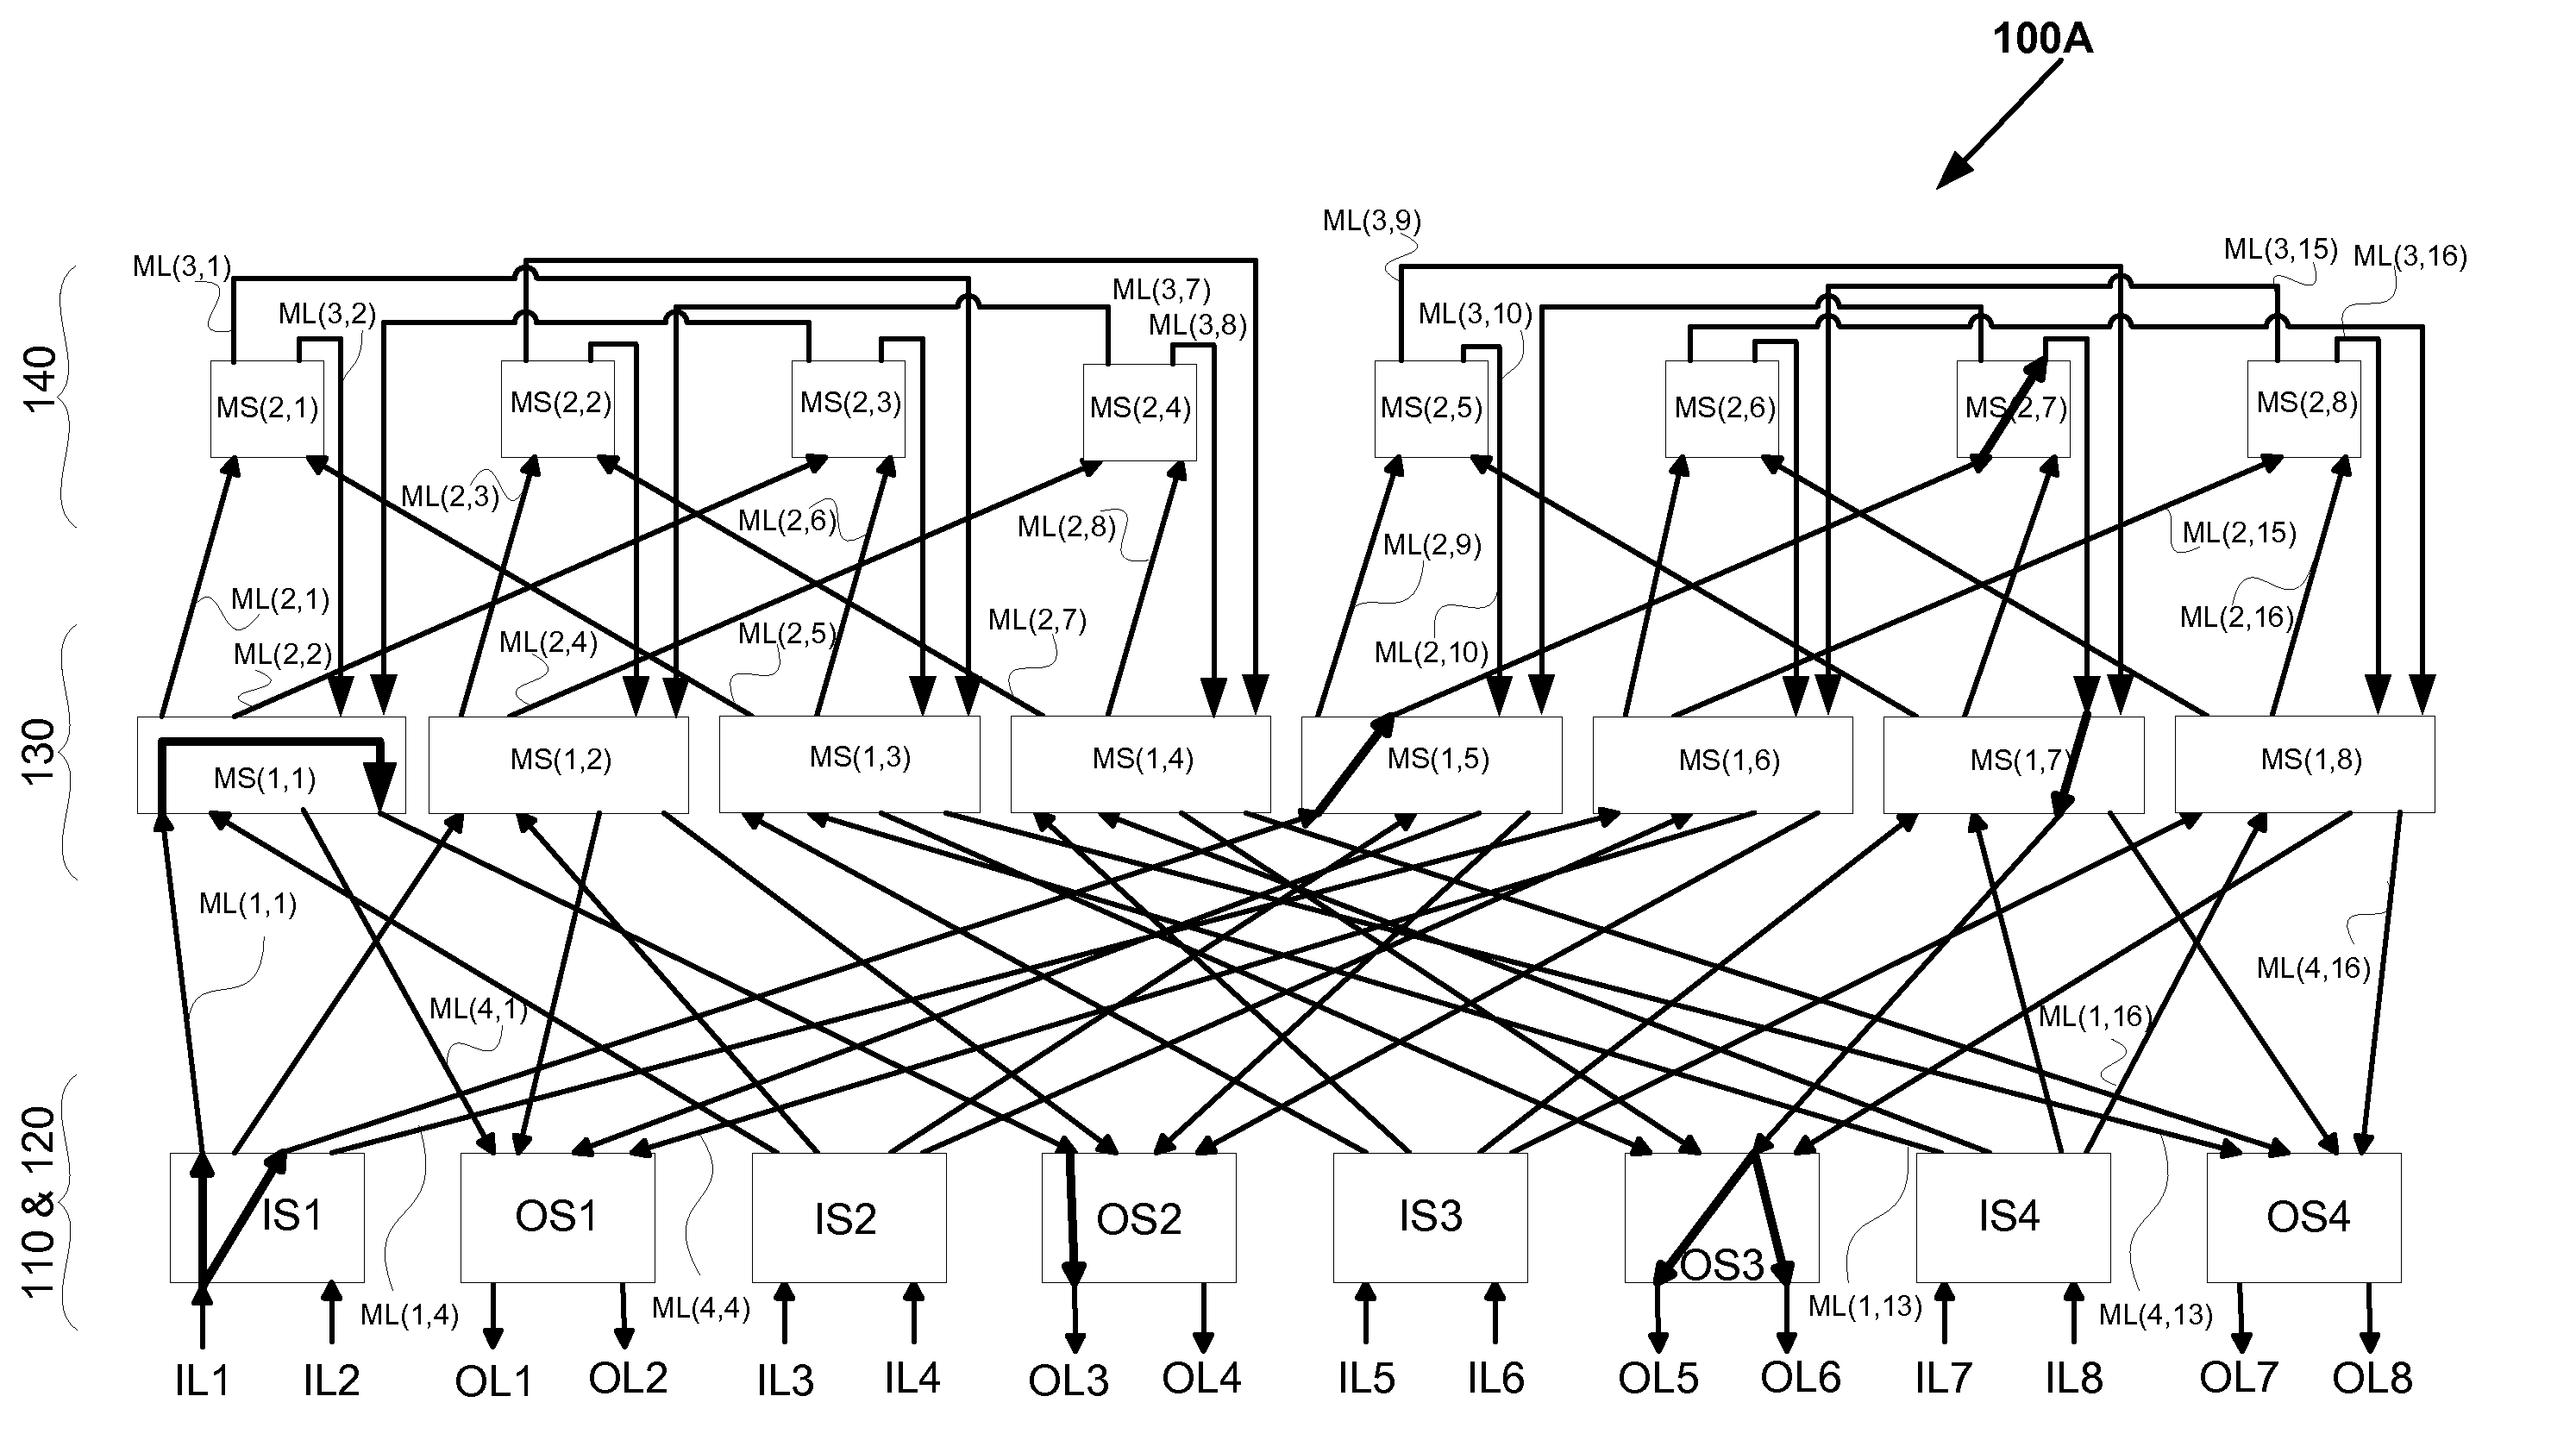 Fully connected generalized butterfly fat tree networks